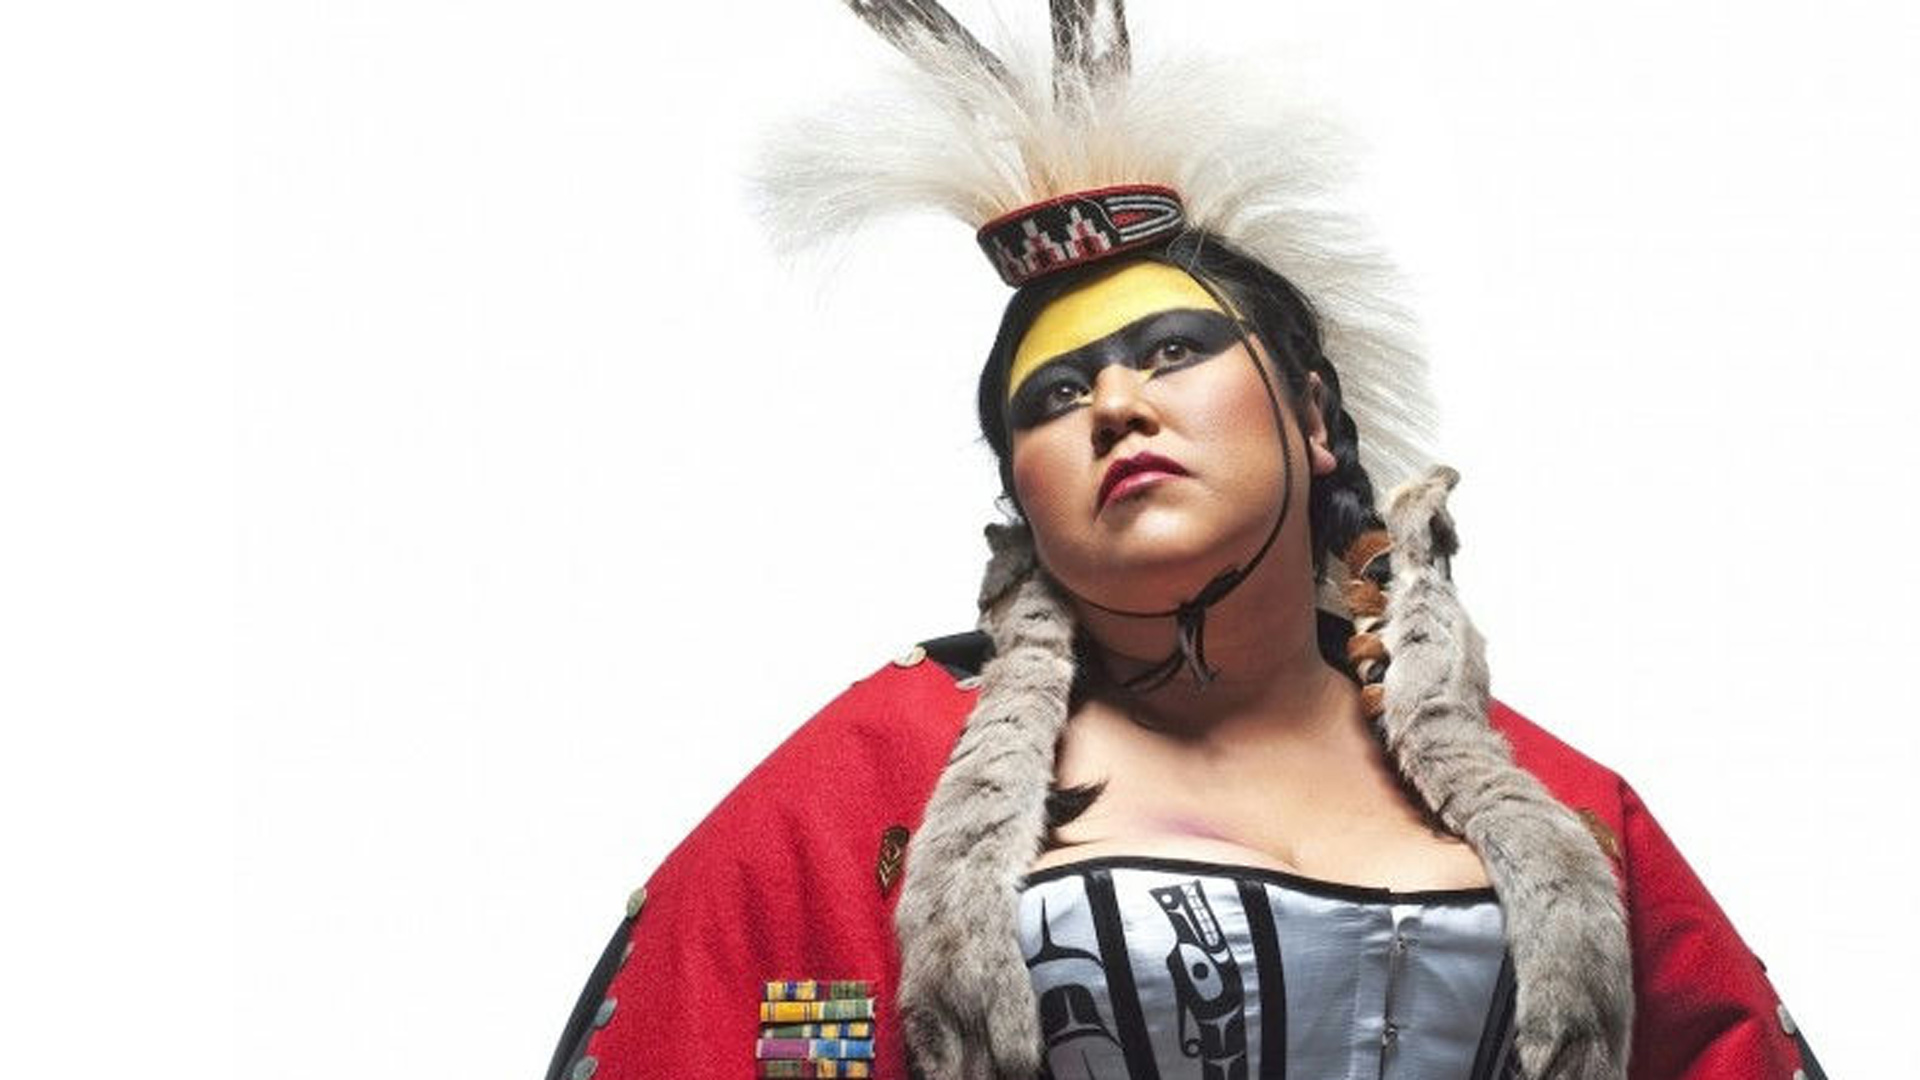 A portrait of artist Skeena Reece, a First Nations woman wearing a red robe with fur lining, and a headdress with feathers. She has yellow and black makeup across her forehead and eyes.